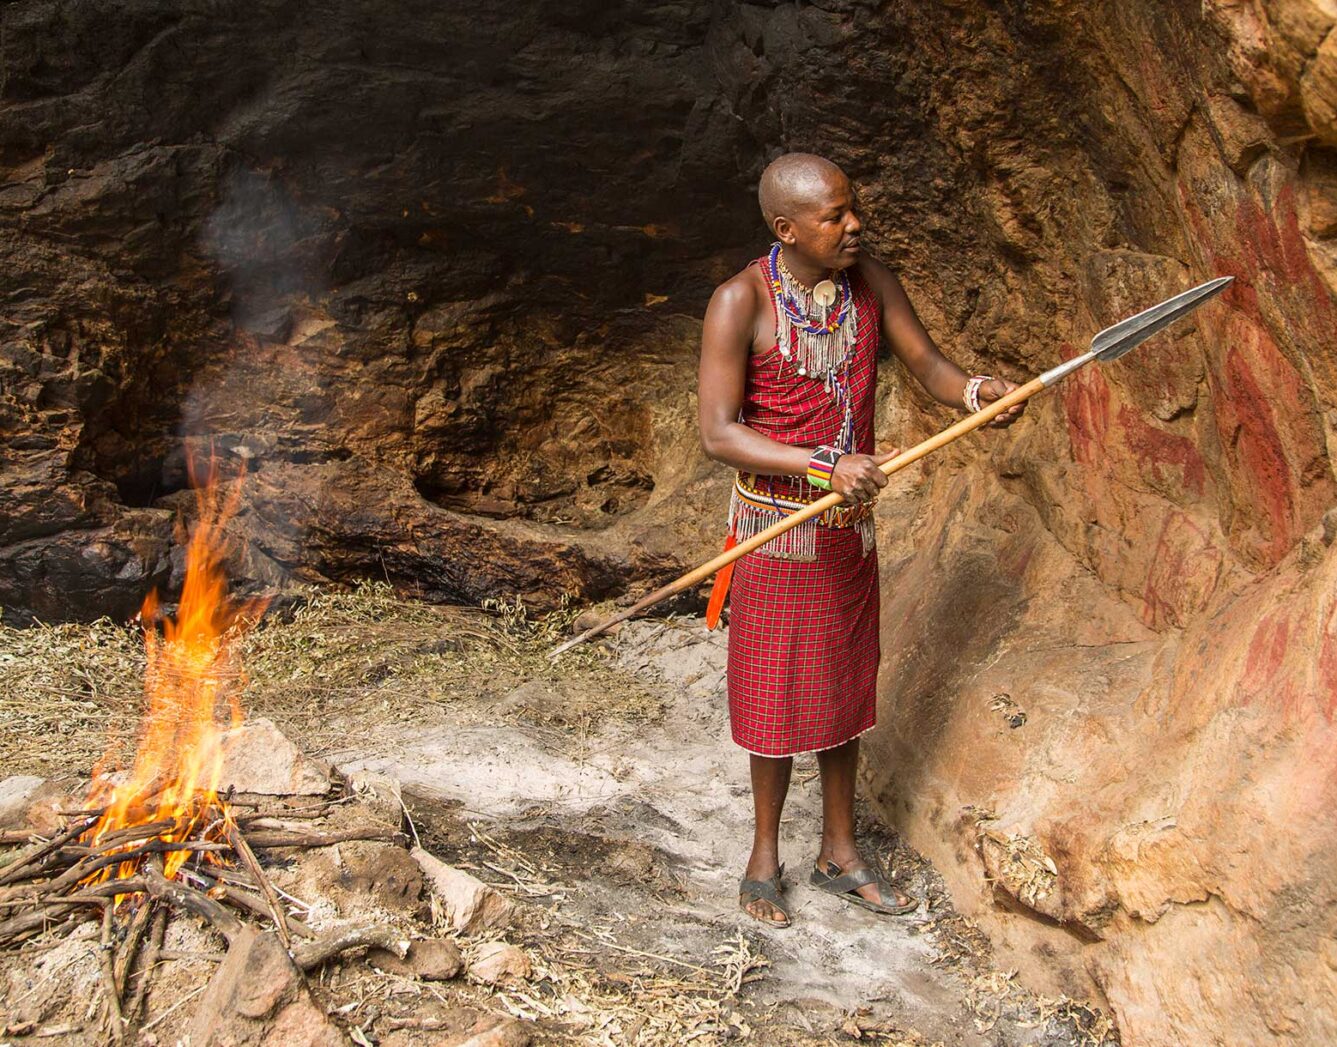 A man stands with a spear beside a fire